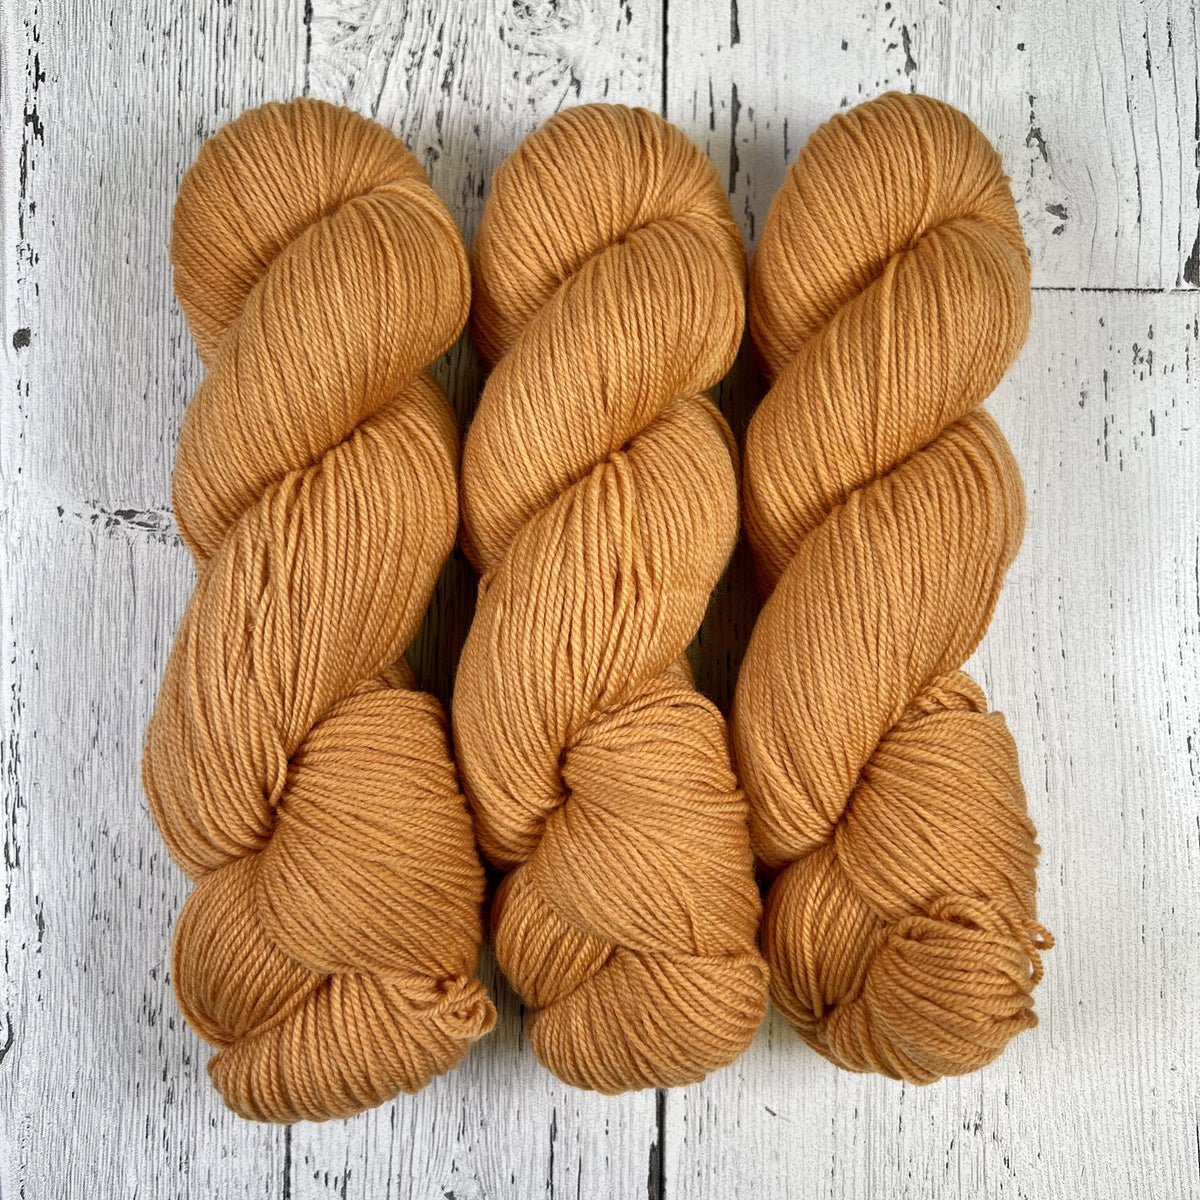 Apricot in DK Weight